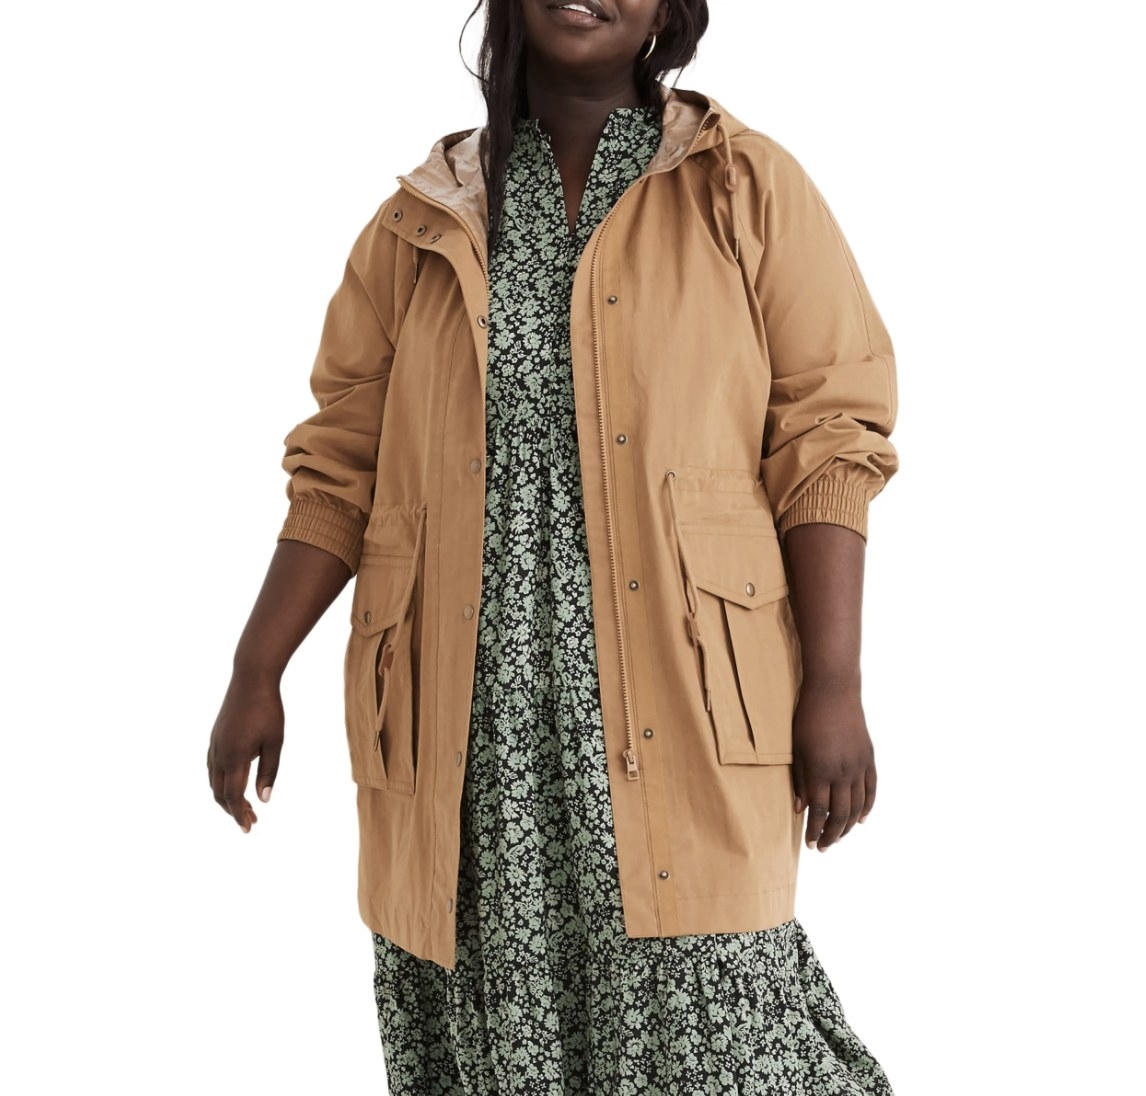 Model is wearing a beige raincoat over a green floral dress